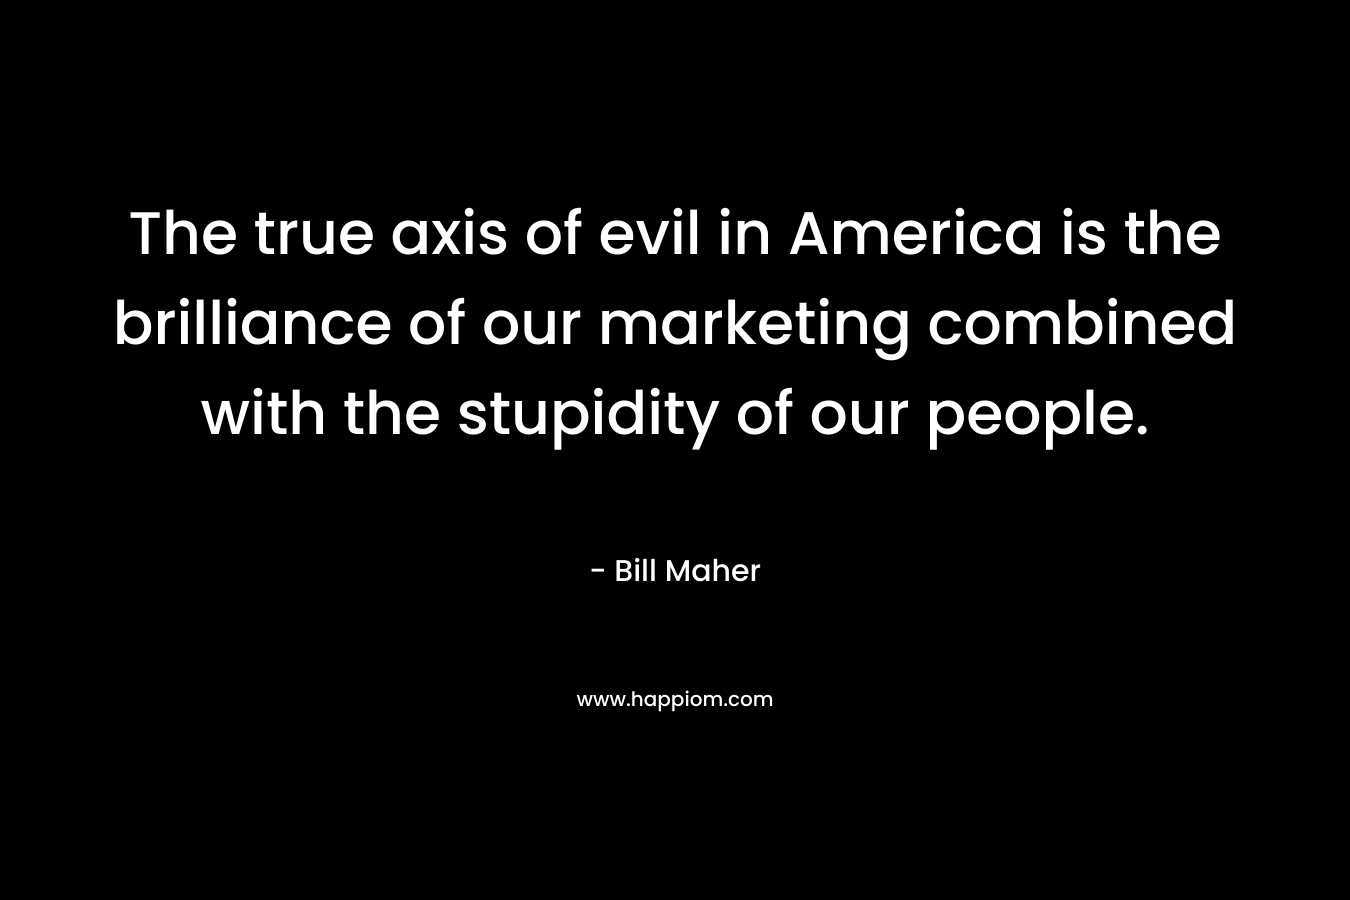 The true axis of evil in America is the brilliance of our marketing combined with the stupidity of our people. – Bill Maher